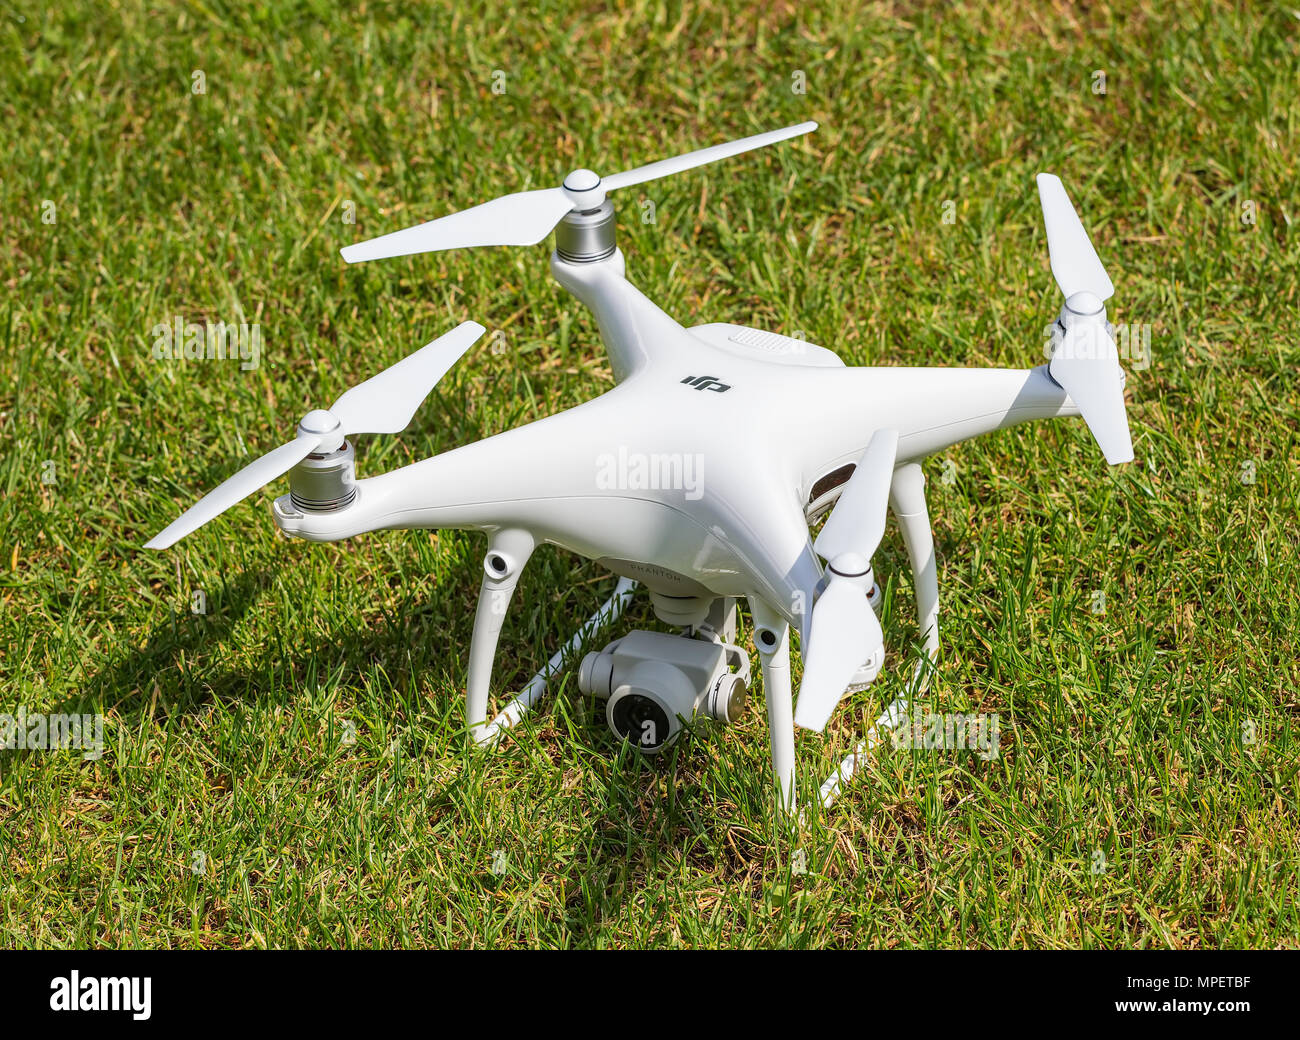 DJI Phantom 4 Pro drone standing on green grass, selective focus on the  front of the drone Stock Photo - Alamy